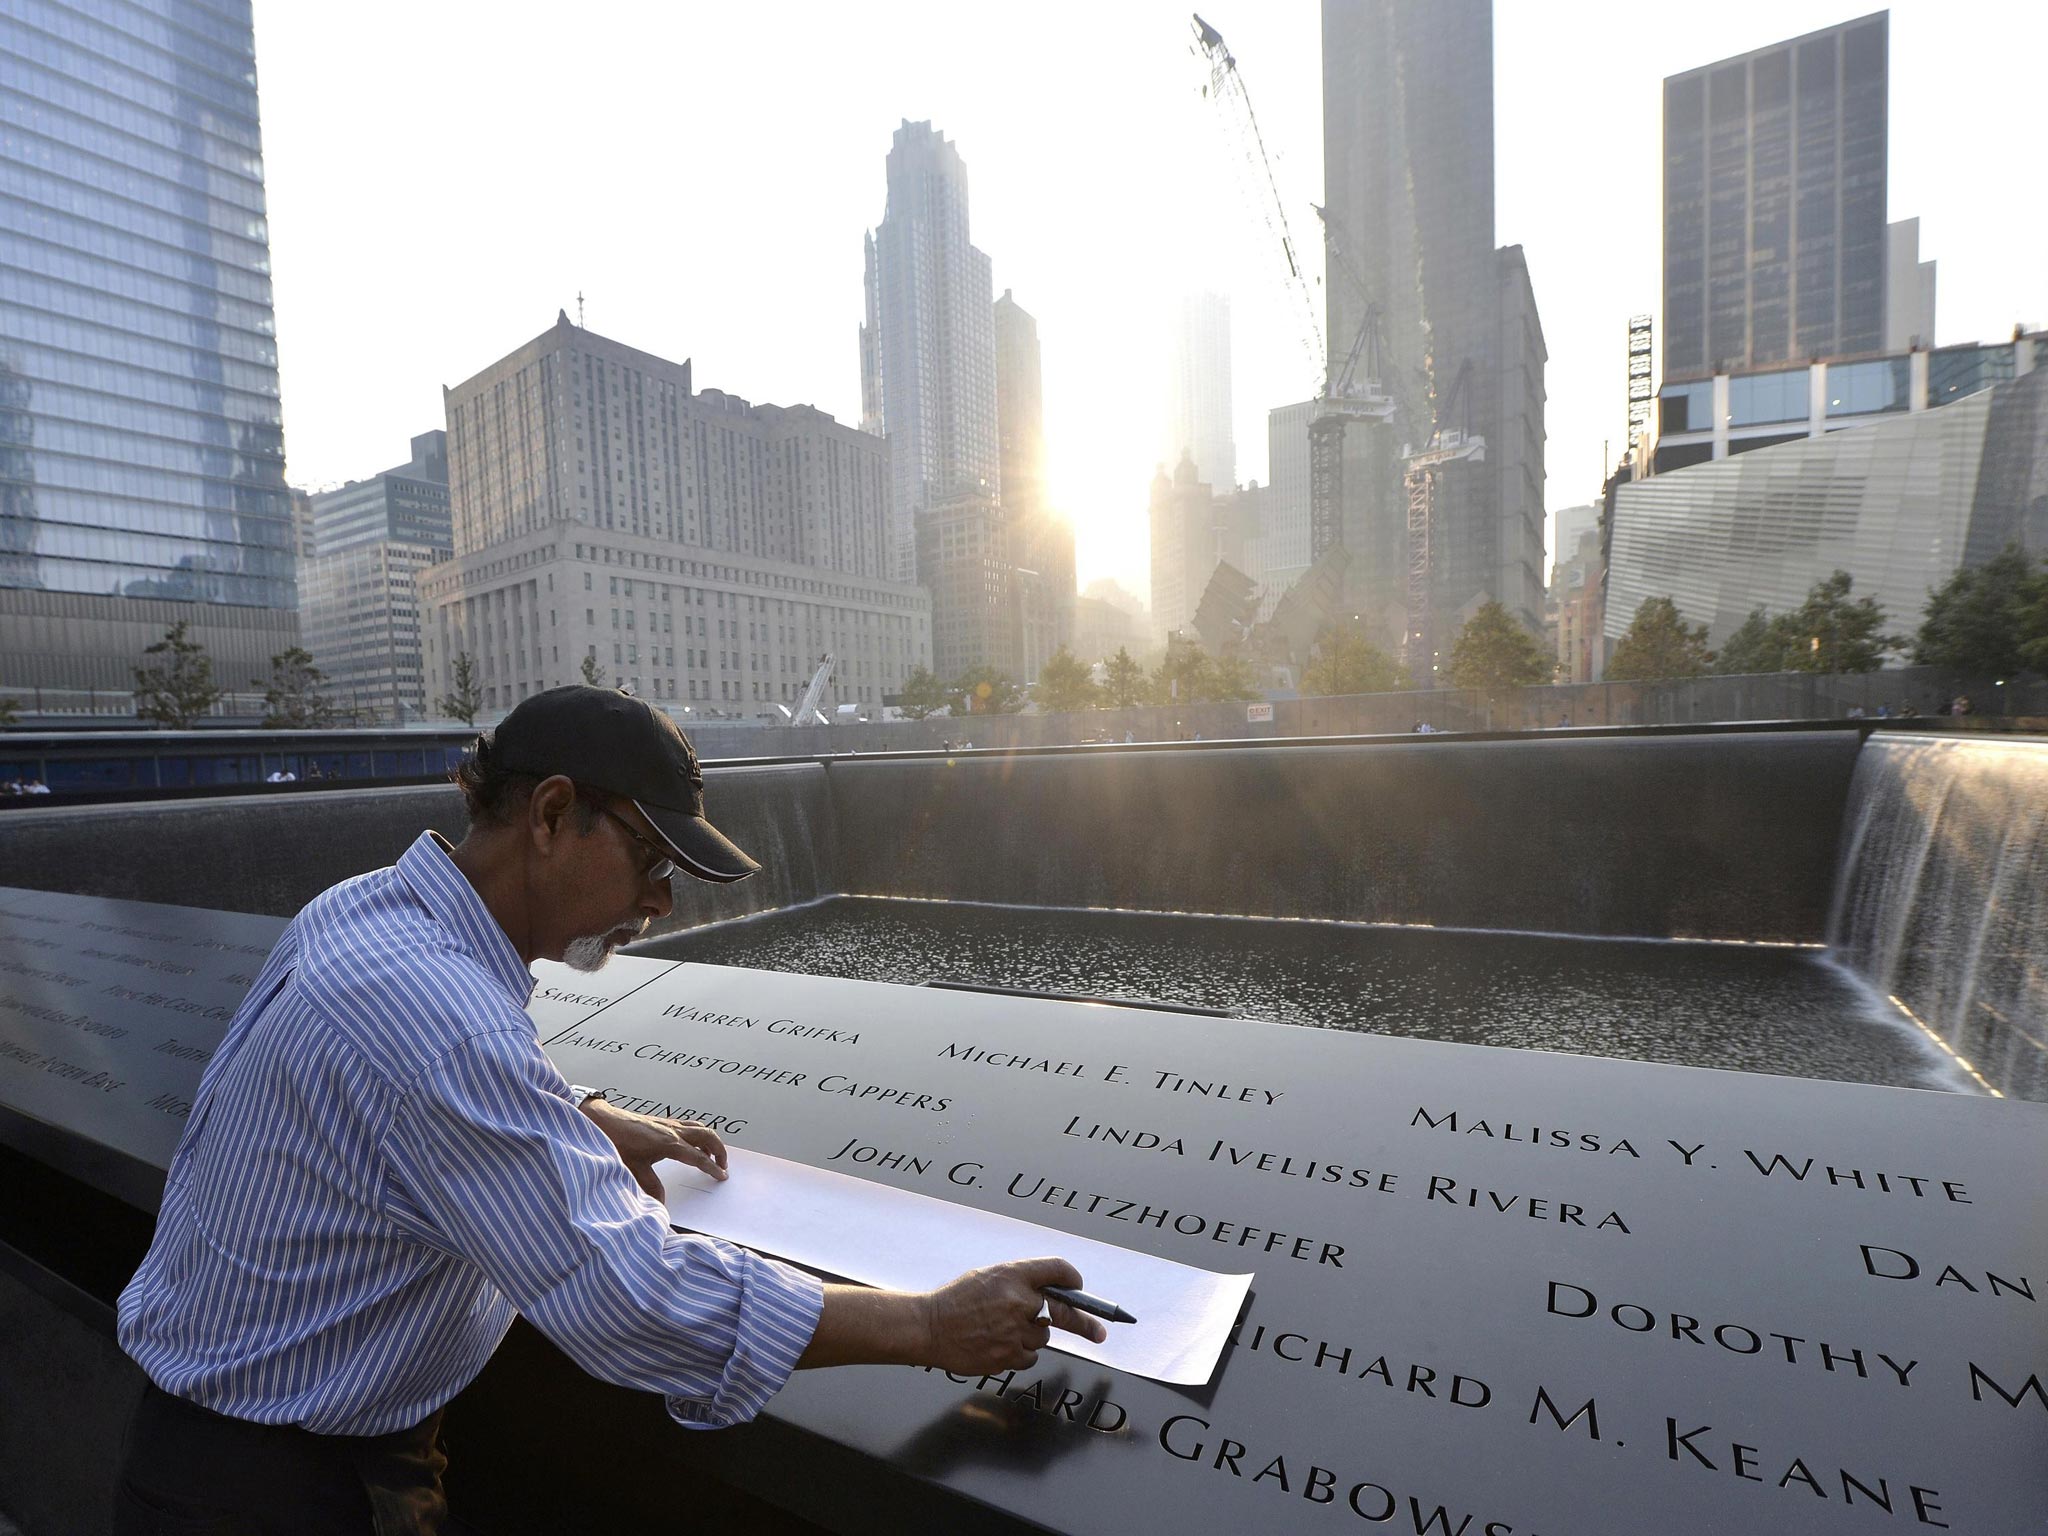 Wakiley Ramen Chowdhury of Chantilly, Virginia makes a rubbing of his niece's name, Shakila Yasmin, at the edge of the North Pool at the 9/11 Memorial during a ceremony marking the 12th anniversary of the 9/11 attacks on the World Trade Center in New York